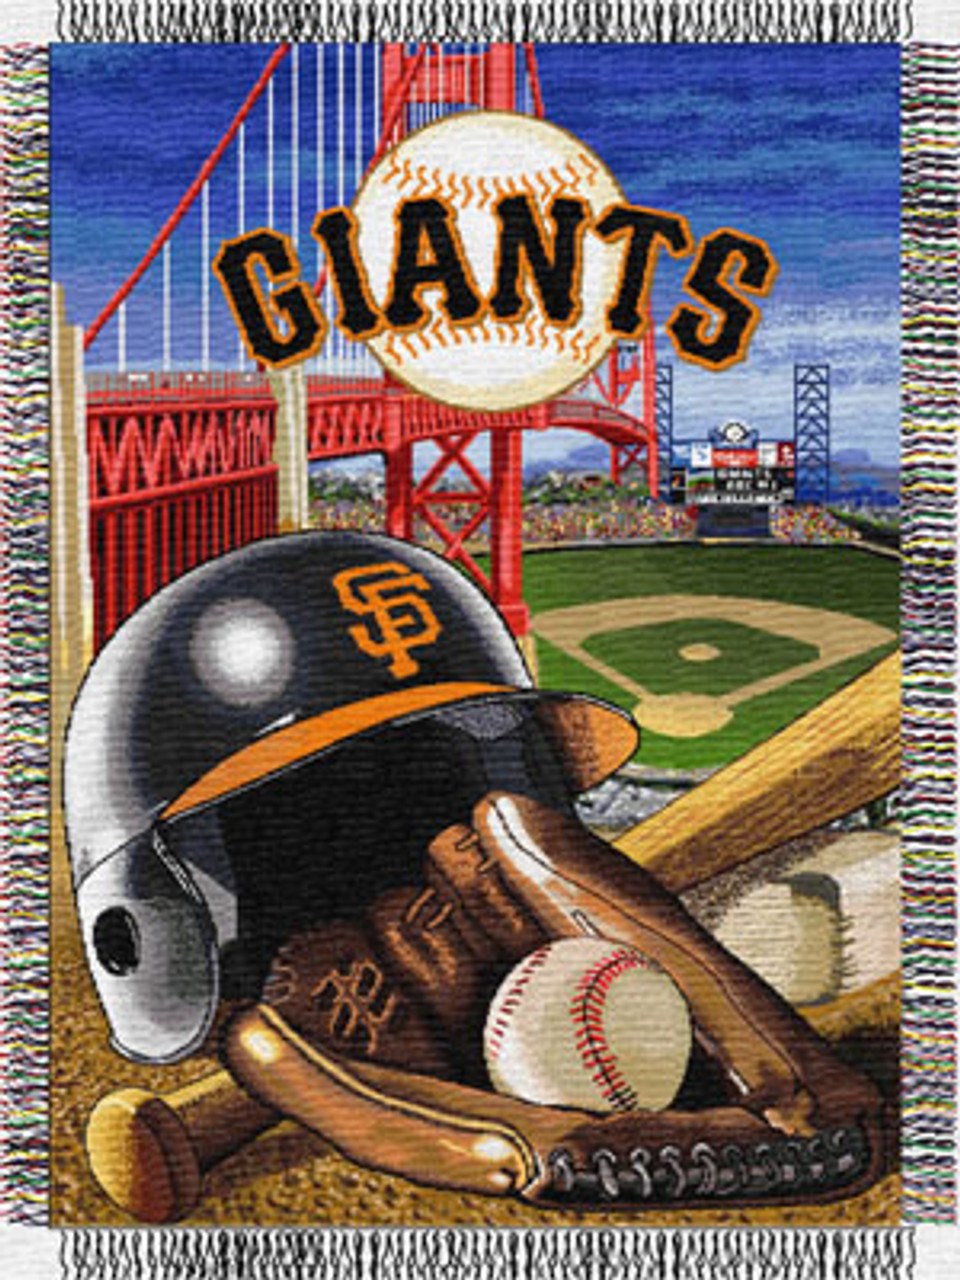 San Francisco Giants Tapestry Throw by Northwest  San francisco giants,  San francisco giants baseball, Giants